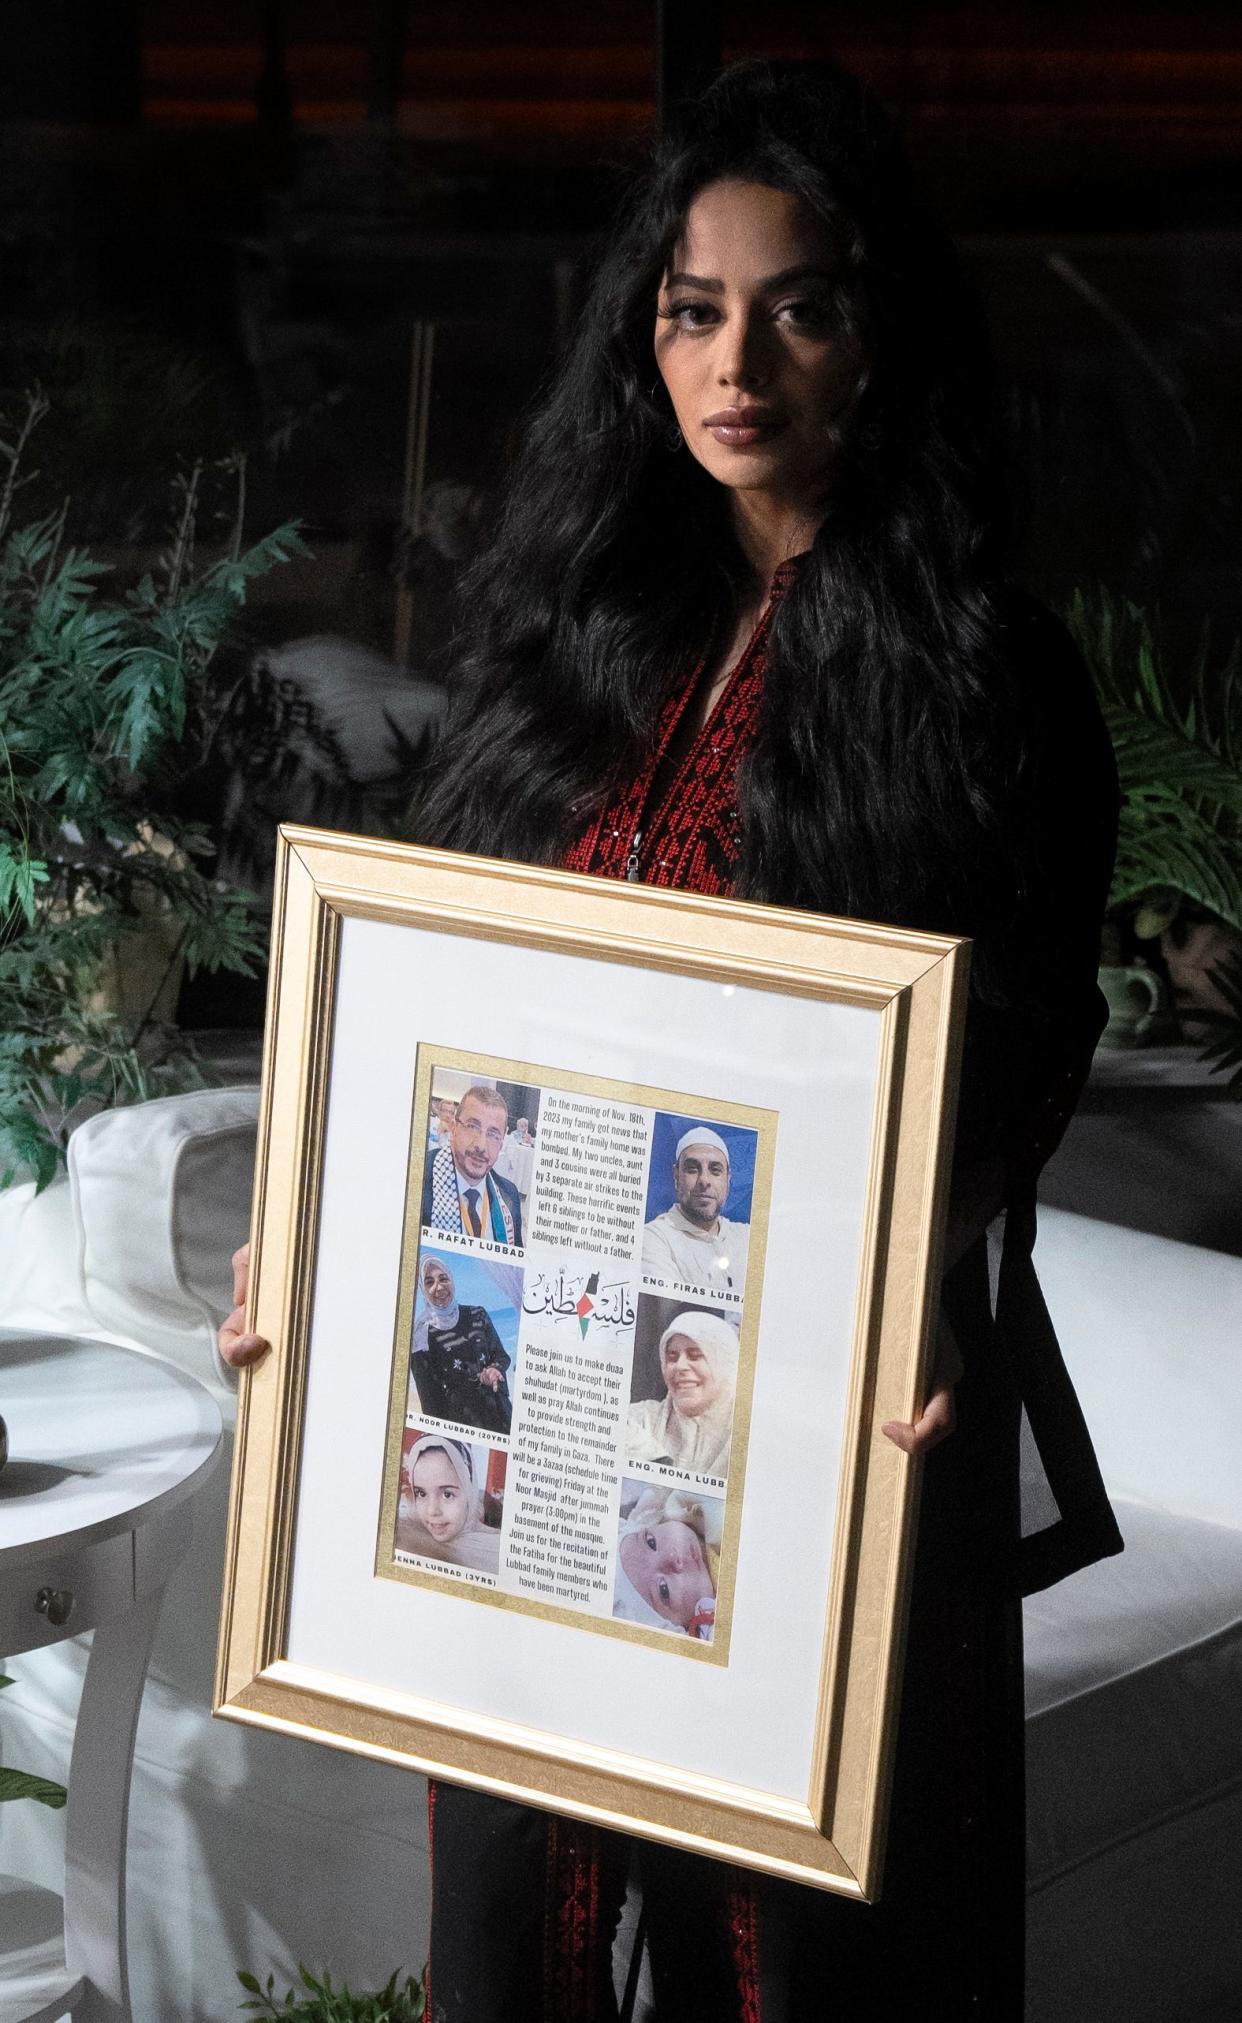 Rosan Eldadah holds a framed photo Monday showing members of her family (two uncles, an aunt and three cousins) who she says were killed following air strikes to the building where they lived in Gaza.